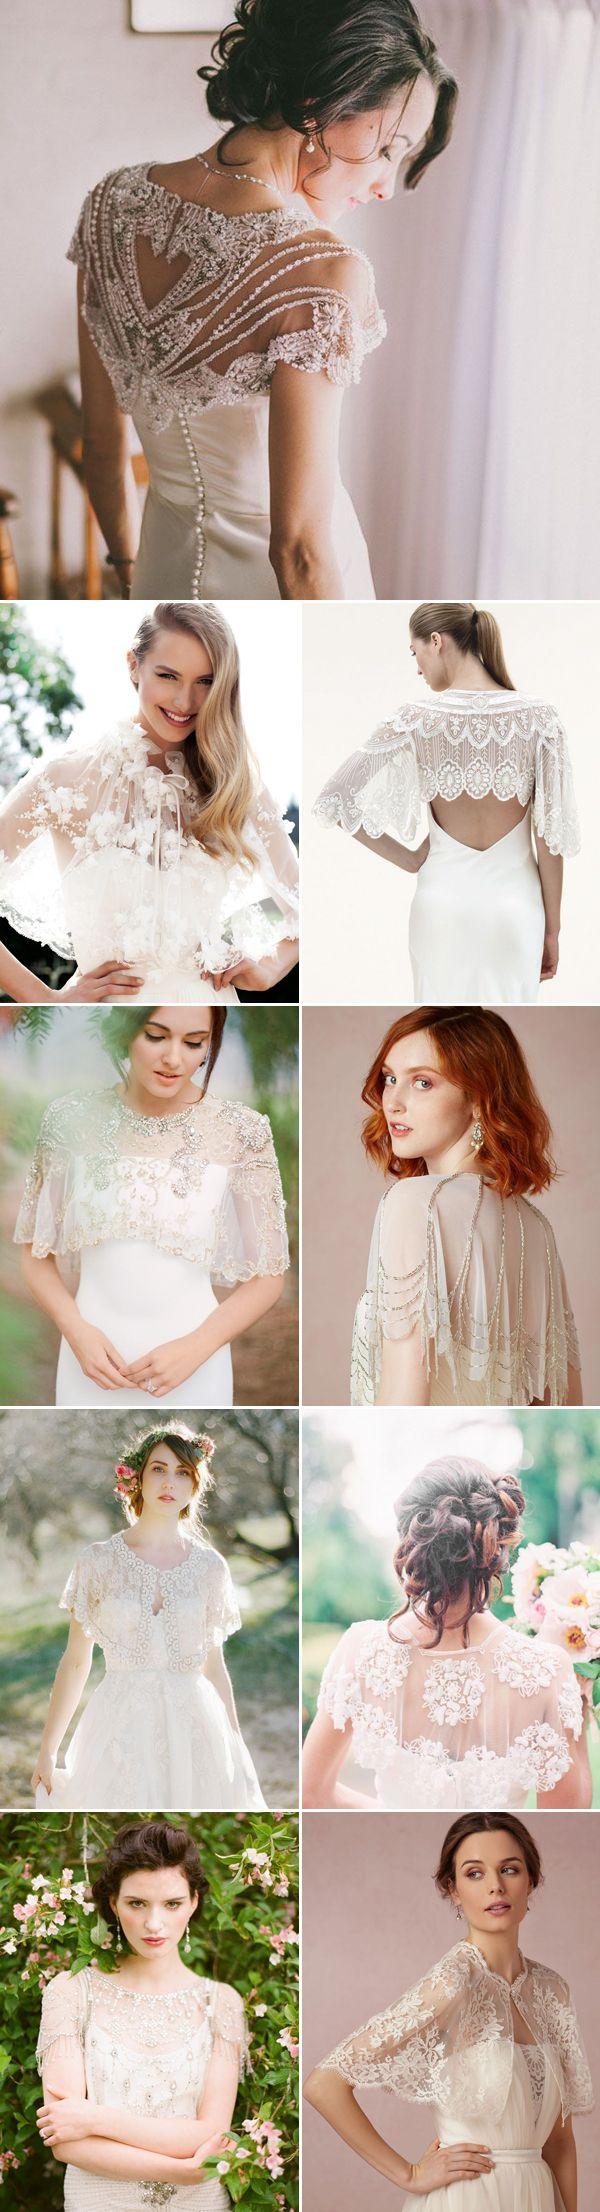 Mariage - Pretty Ways To Keep The Bride Warm - 22 Chic Bridal Cover-Ups